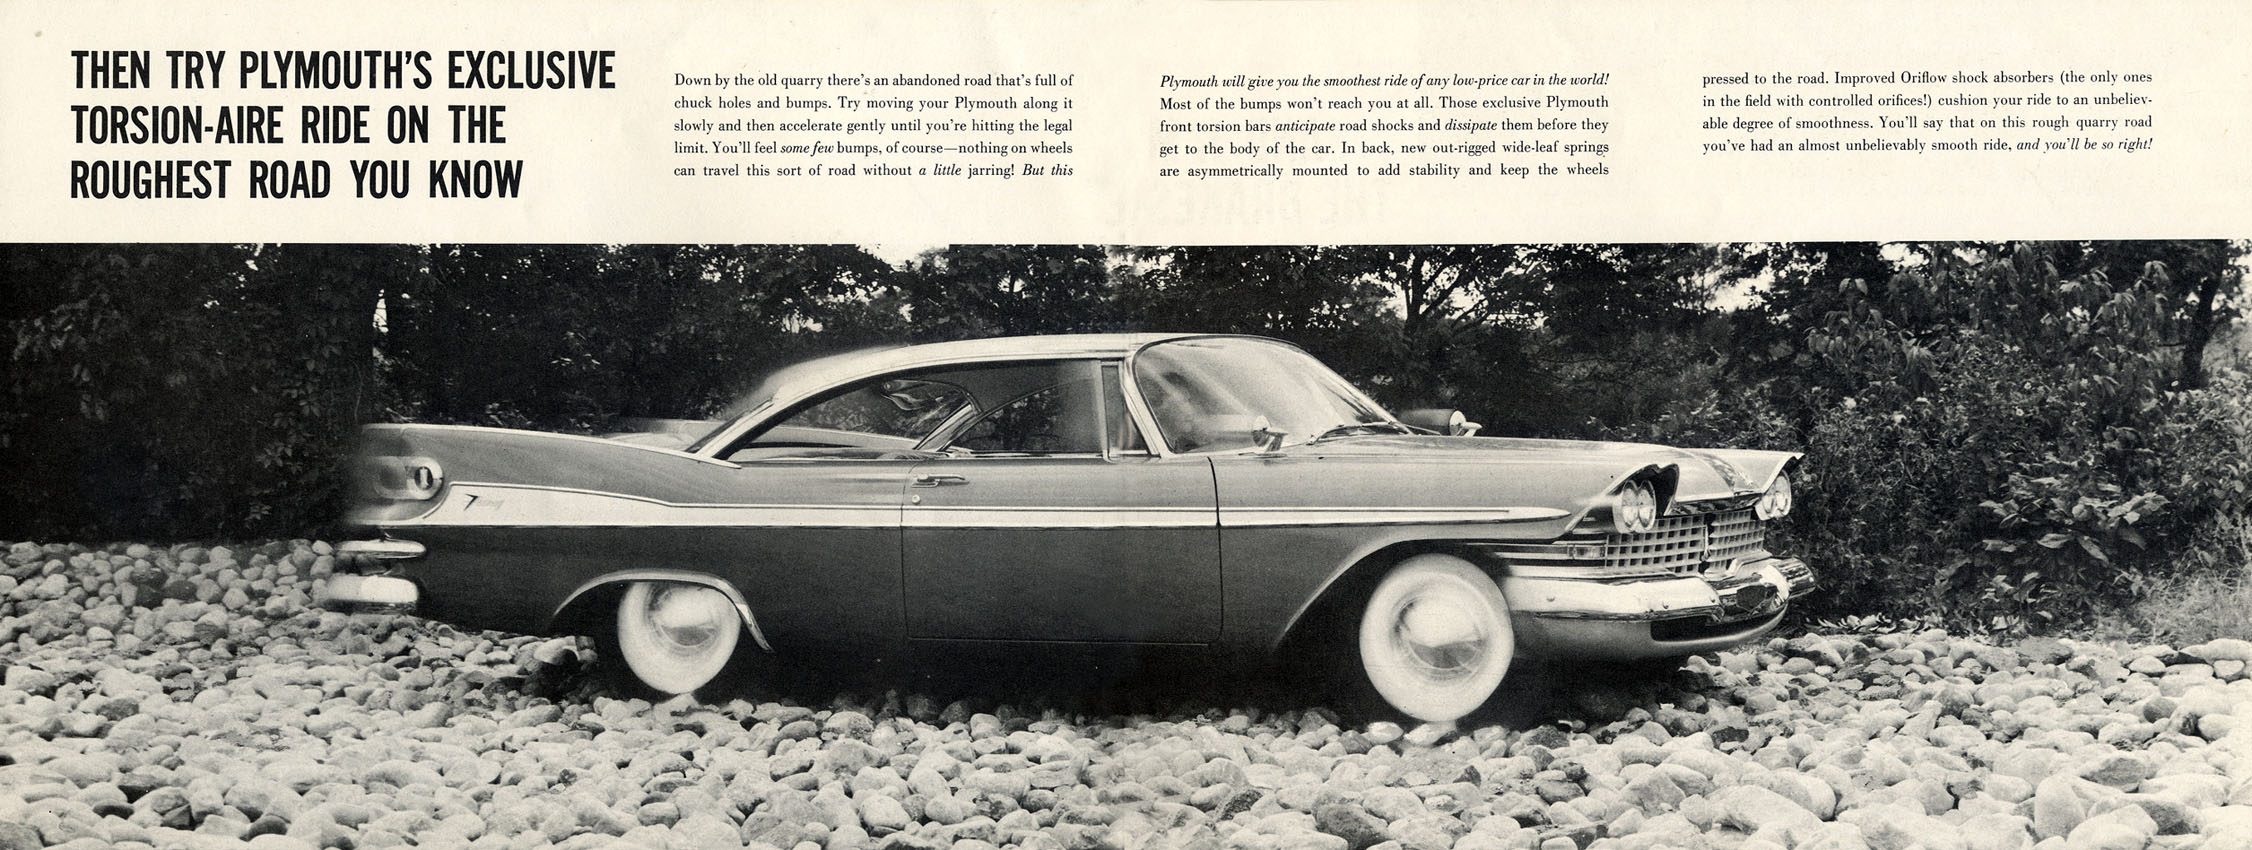 1959_Plymouth_Mailer-10-11